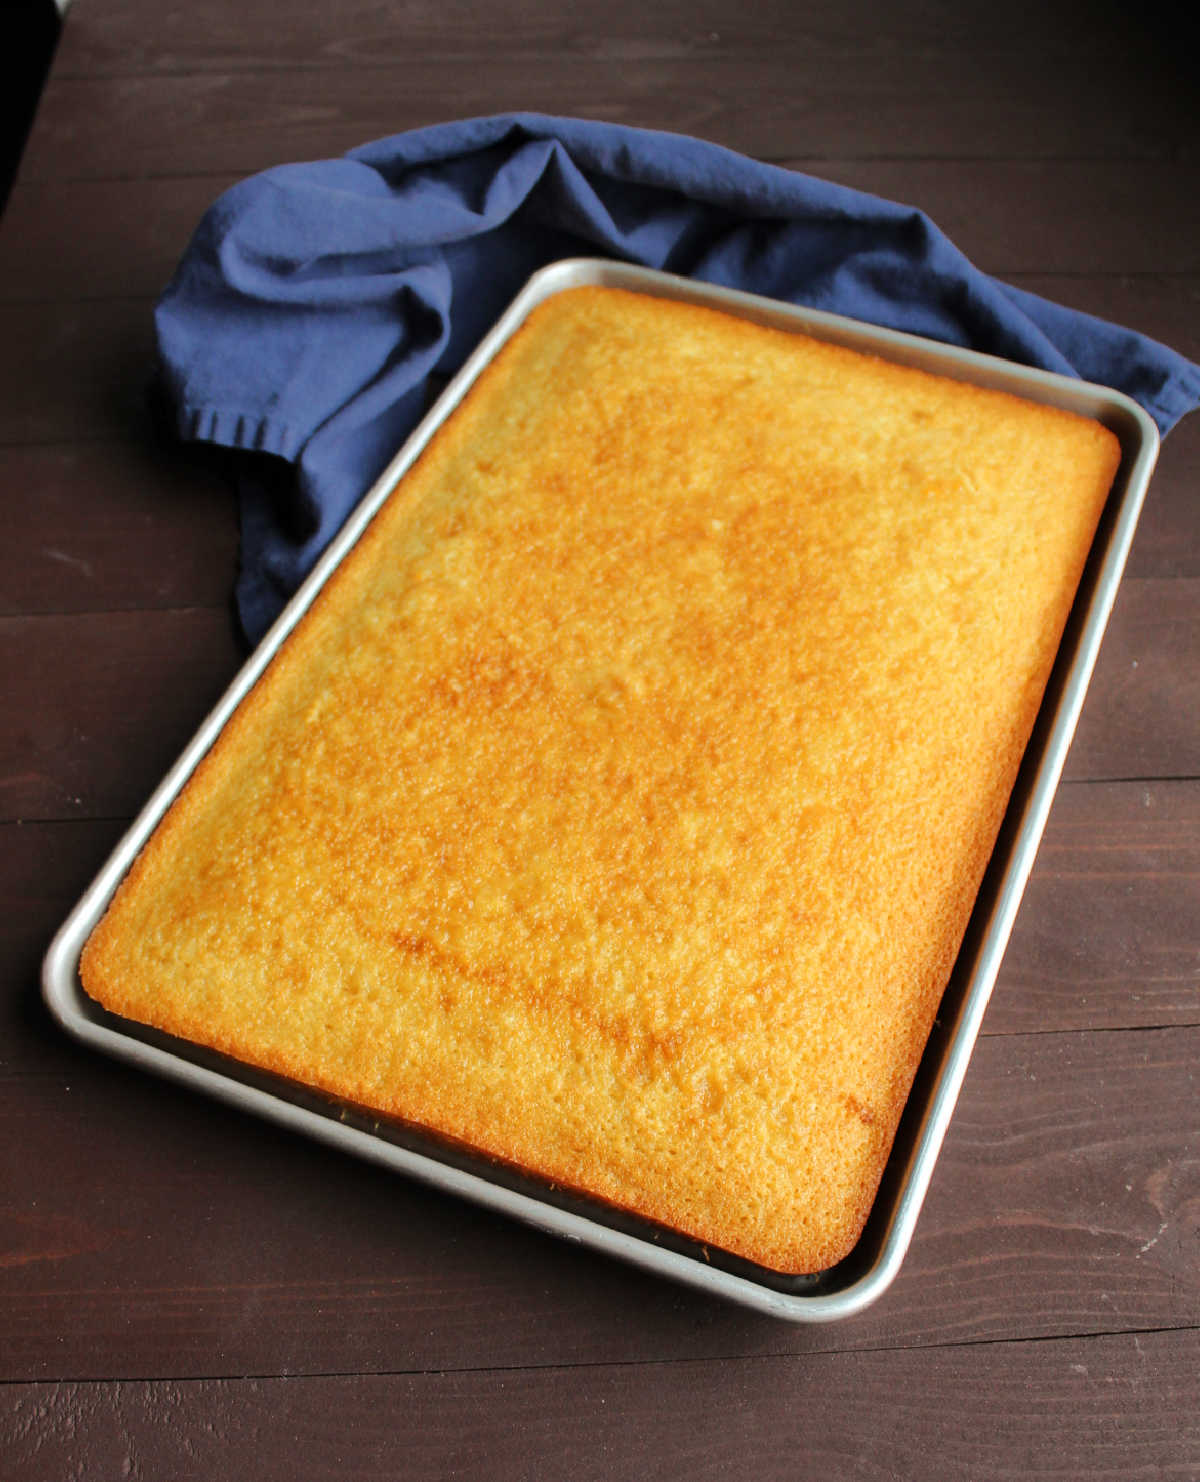 sheet pan filled with golden vanilla cake ready to be frosted.